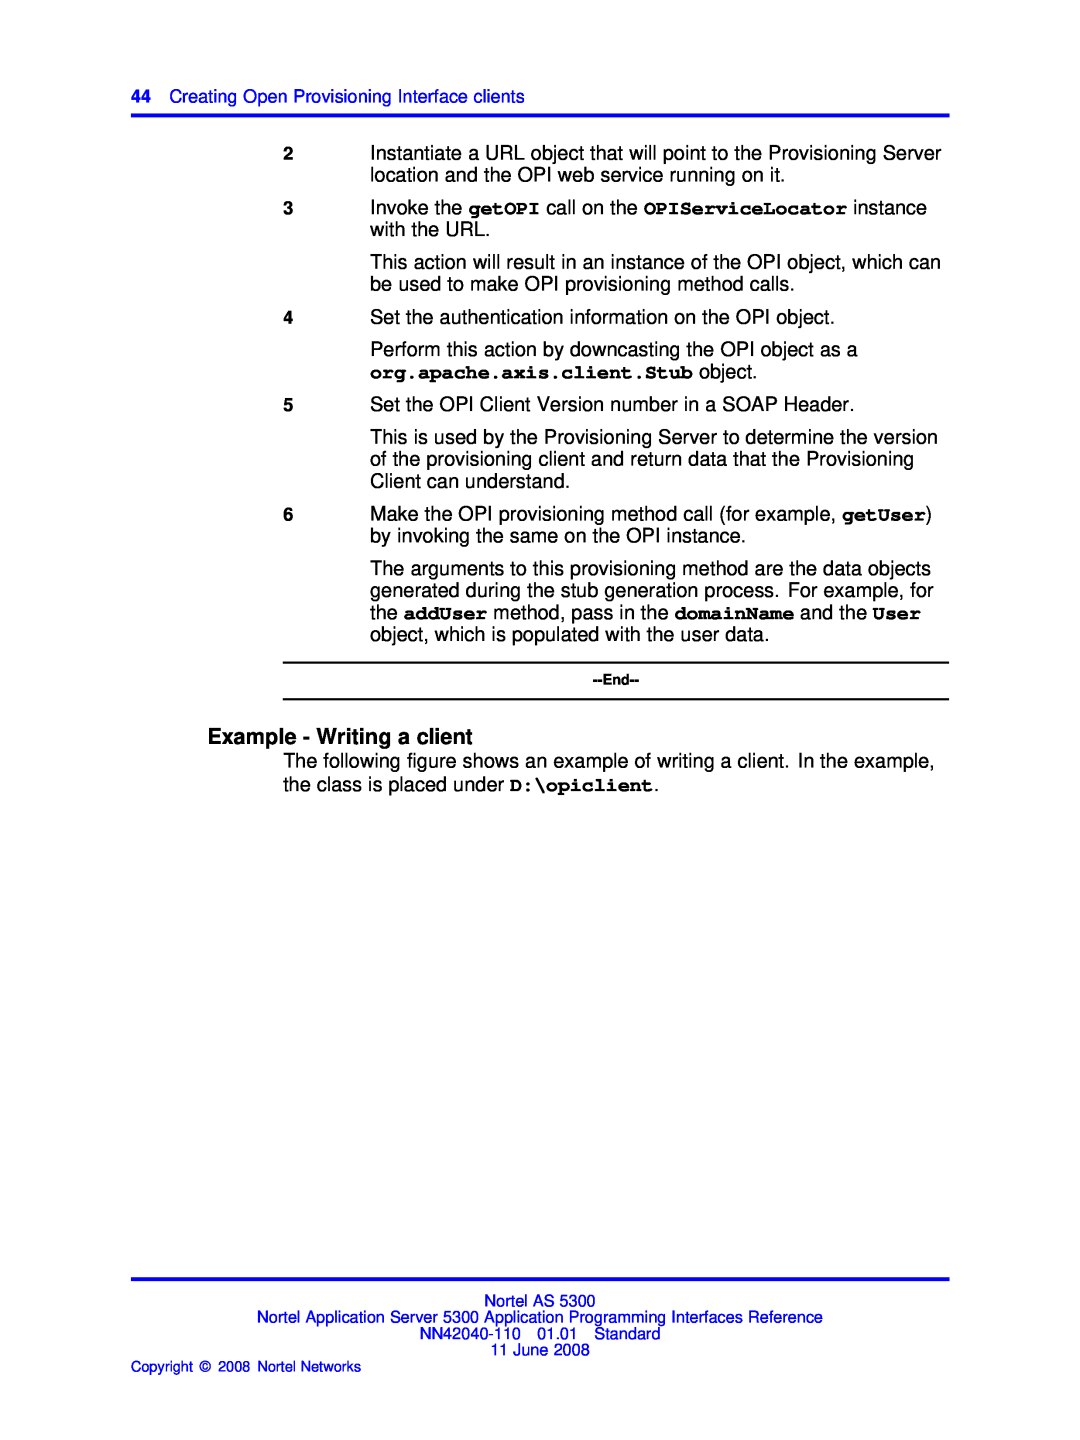 Nortel Networks AS 5300 manual Example - Writing a client 